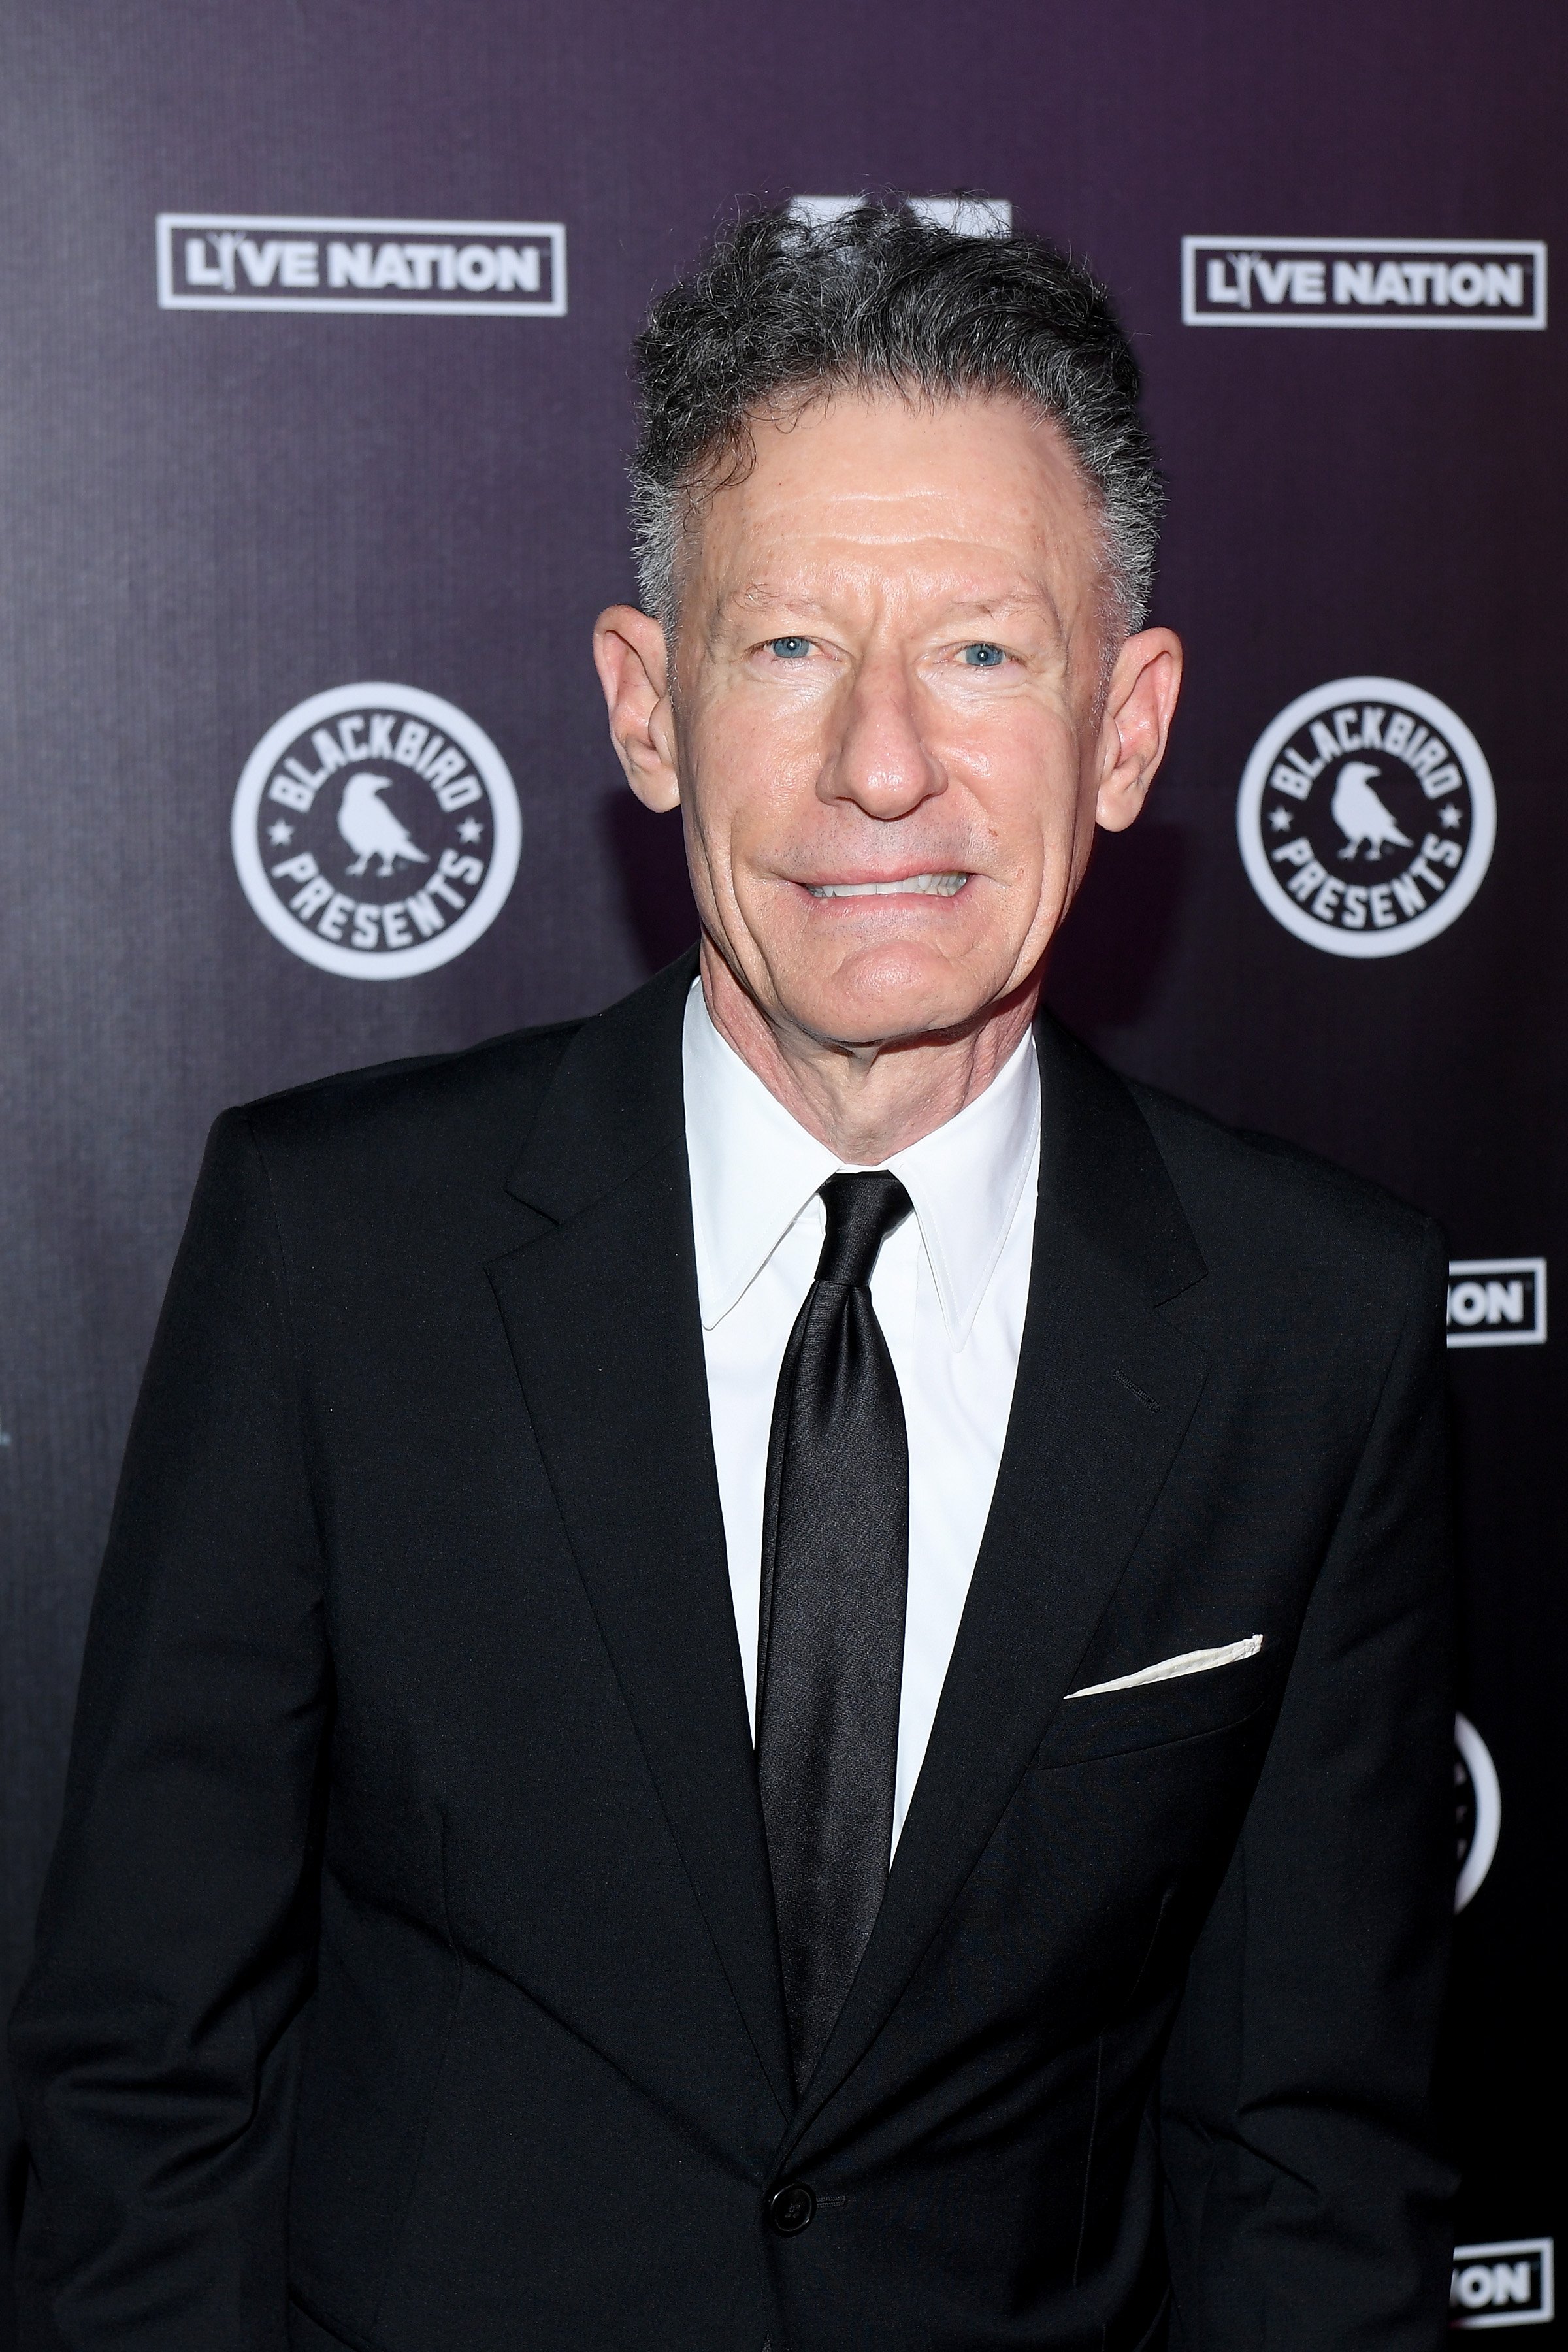 Lyle Lovett at Live Nation | Getty Images